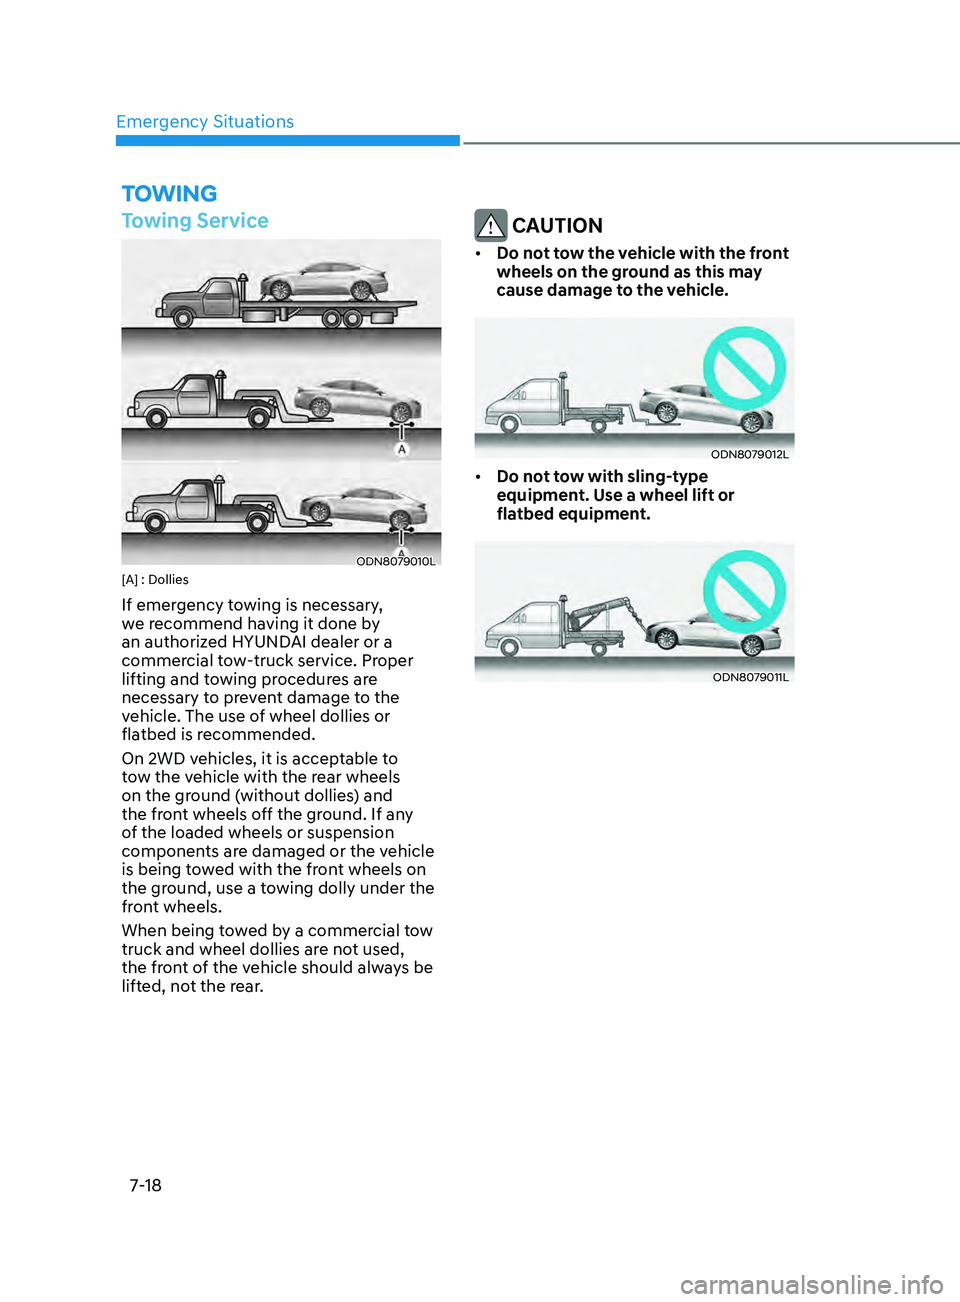 HYUNDAI SONATA LIMITED 2020  Owners Manual Emergency Situations
7-18
toWIng
Towing Service
ODN8079010L[A] : Dollies
If emergency towing is necessary, 
we recommend having it done by 
an authorized HYUNDAI dealer or a 
commercial tow-truck serv